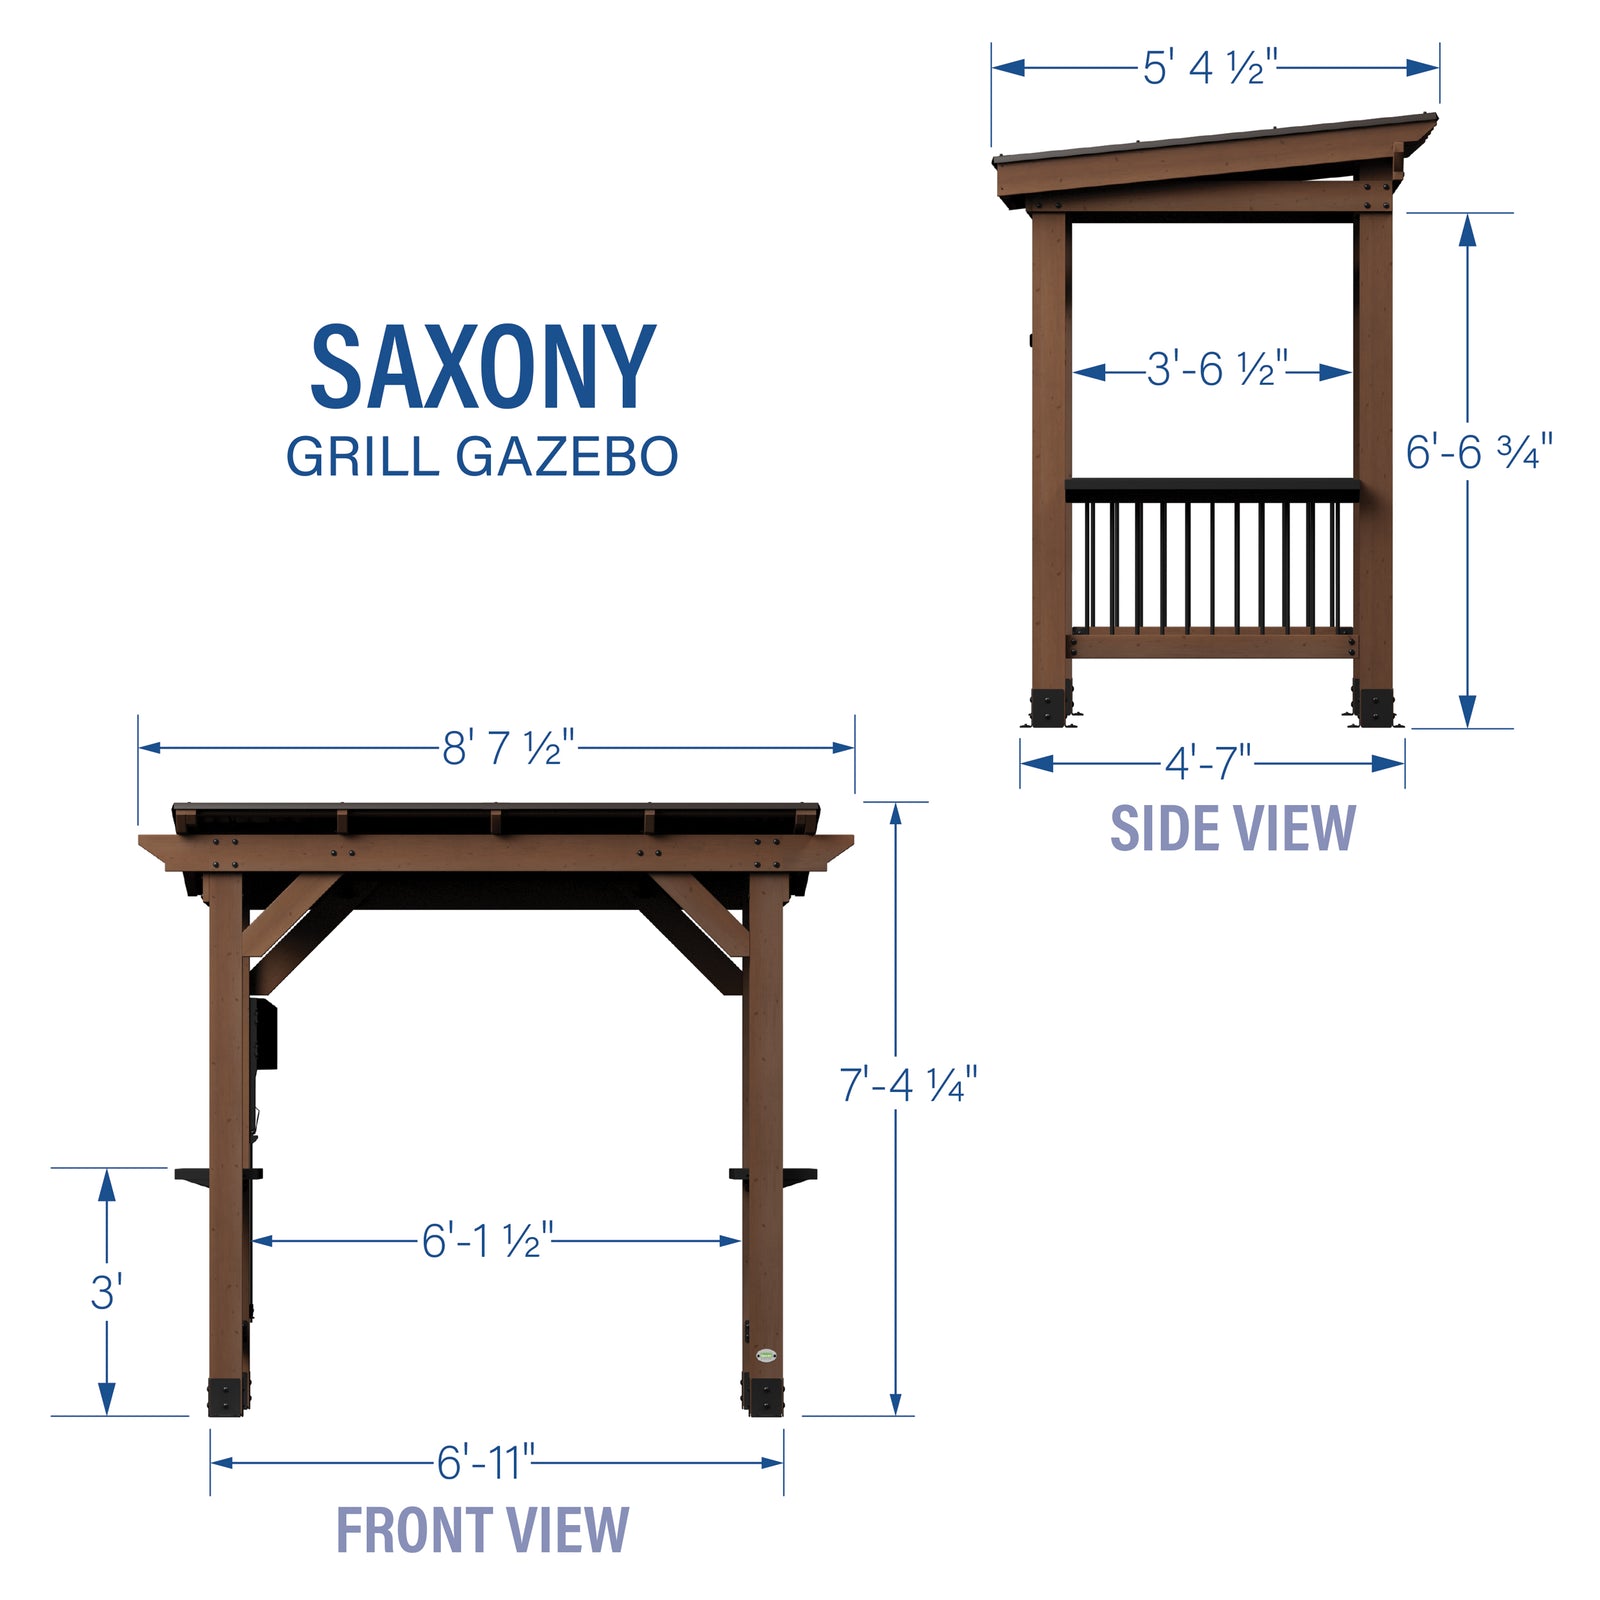 Load image into Gallery viewer, Saxony Grill Gazebo Dimensions
